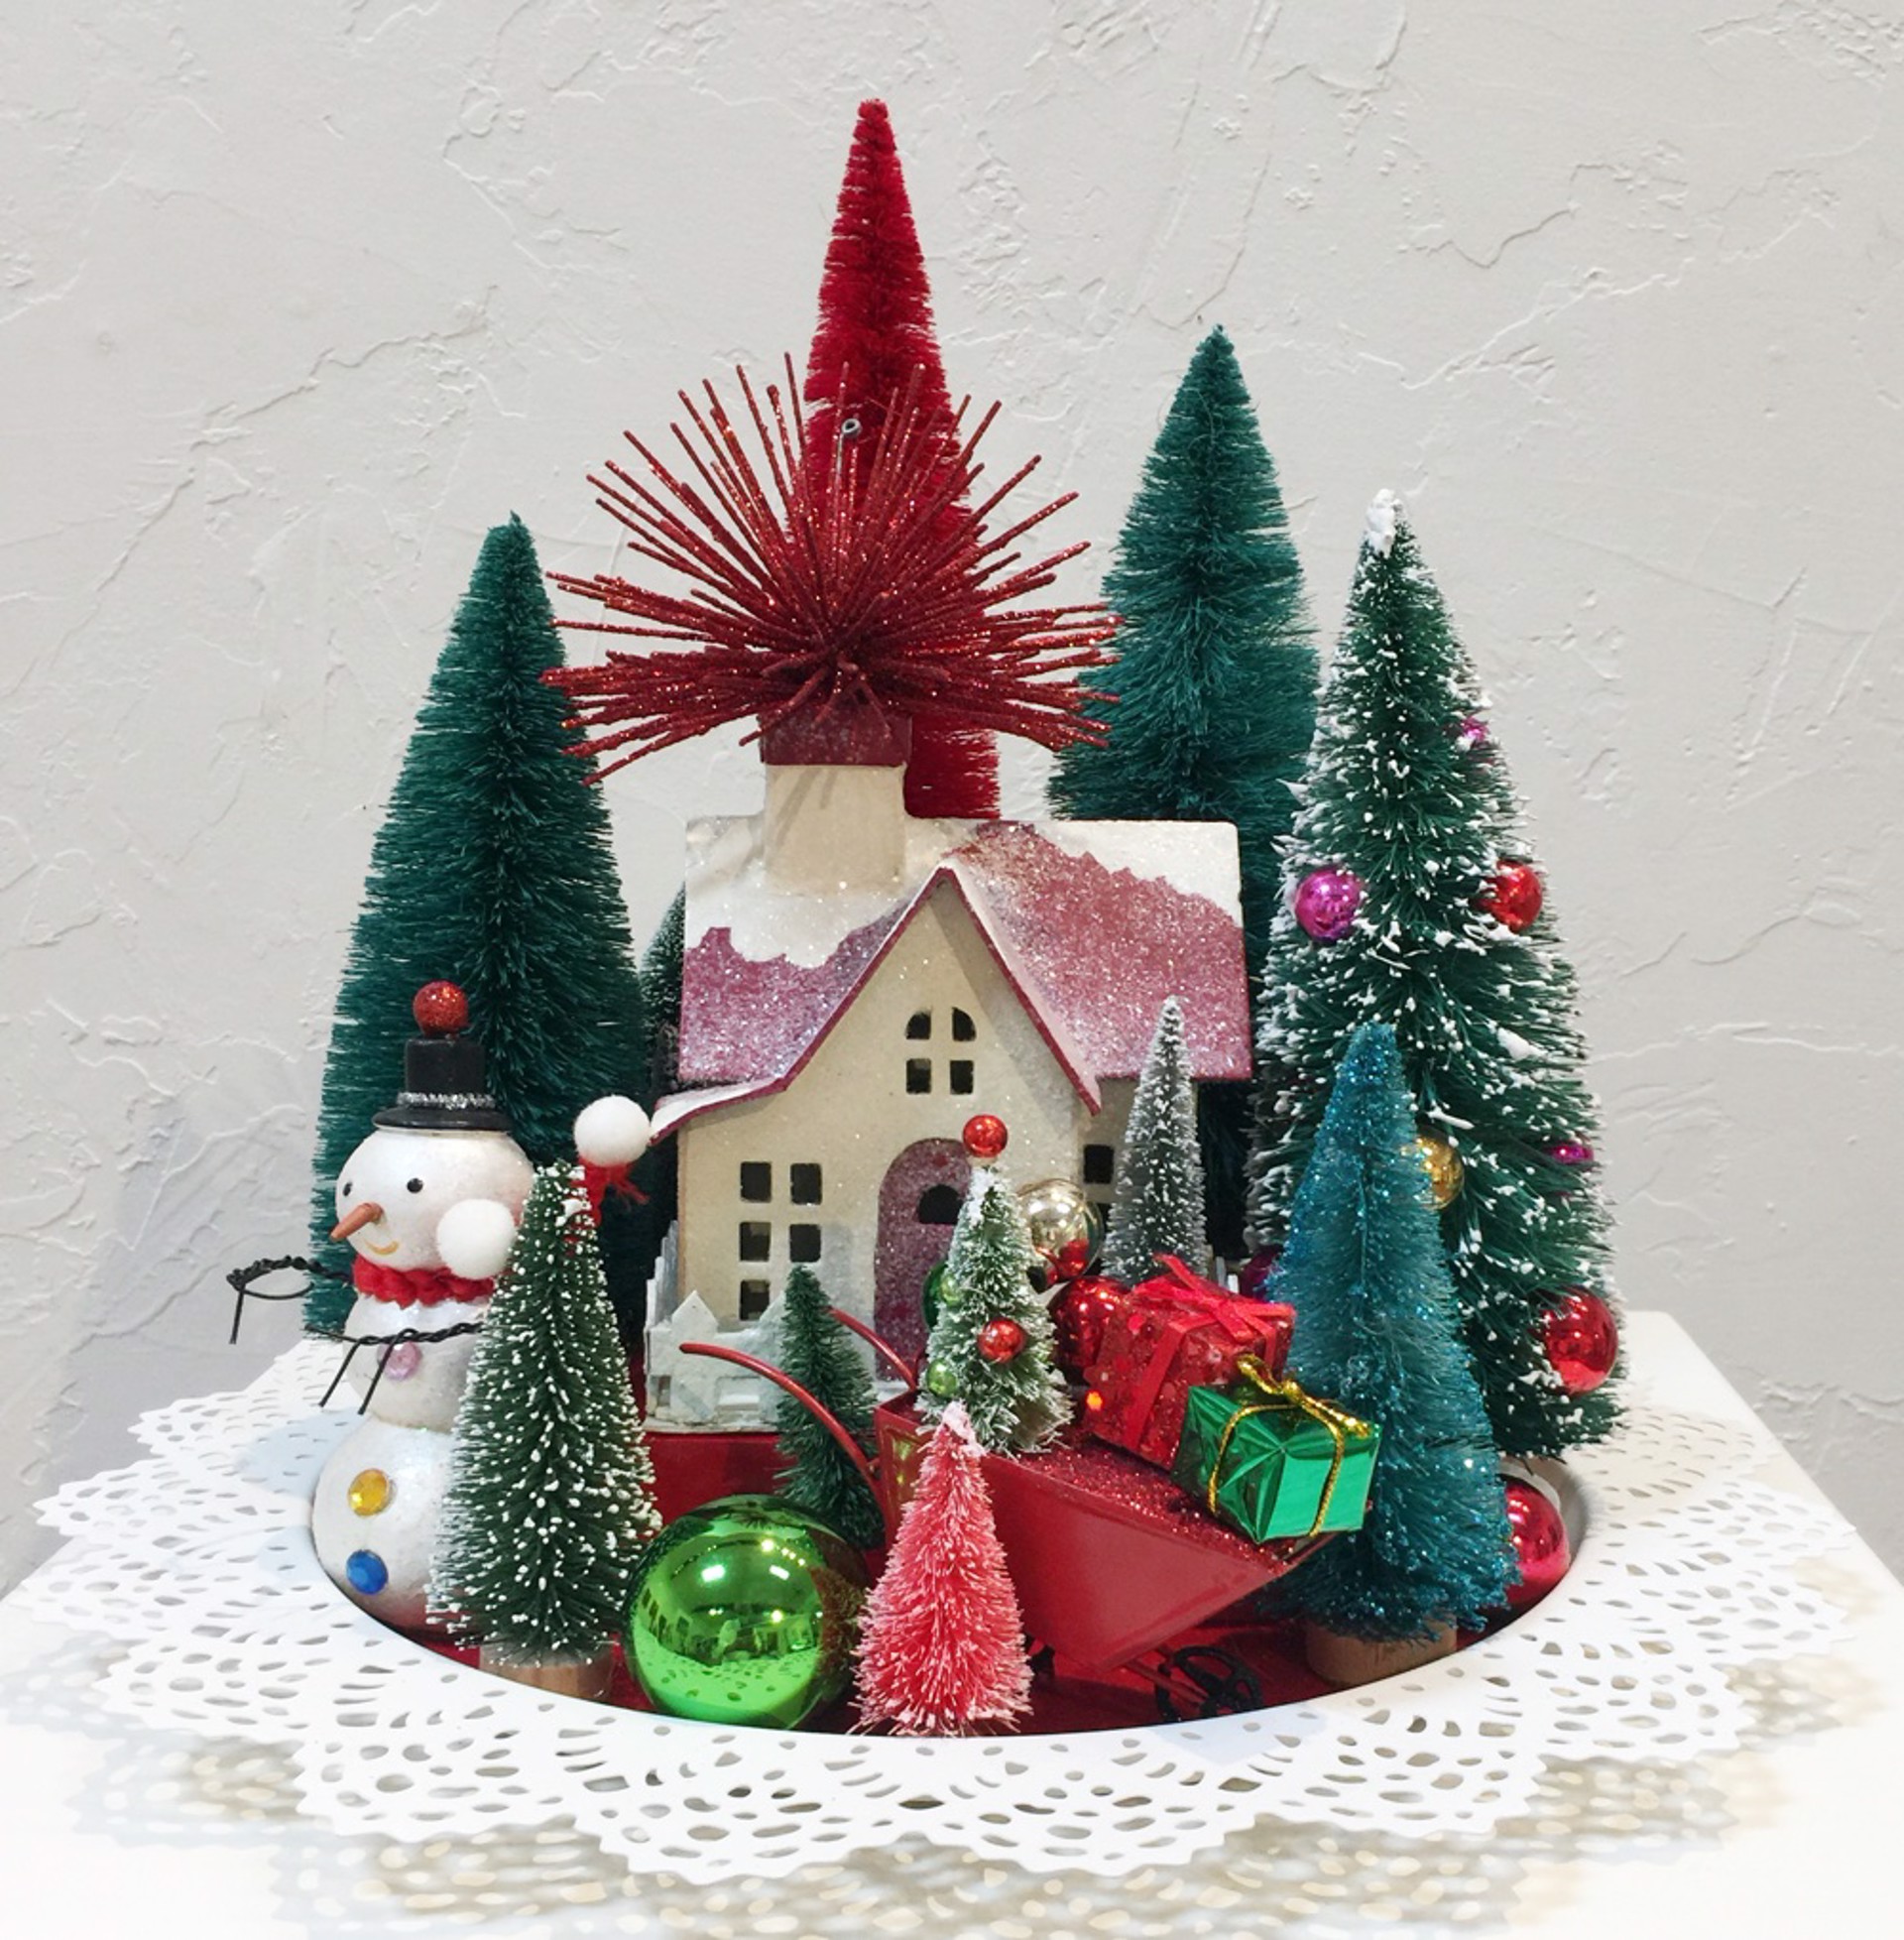 Holiday Vignette - Reds & Greens With Snowman by Kim Yubeta